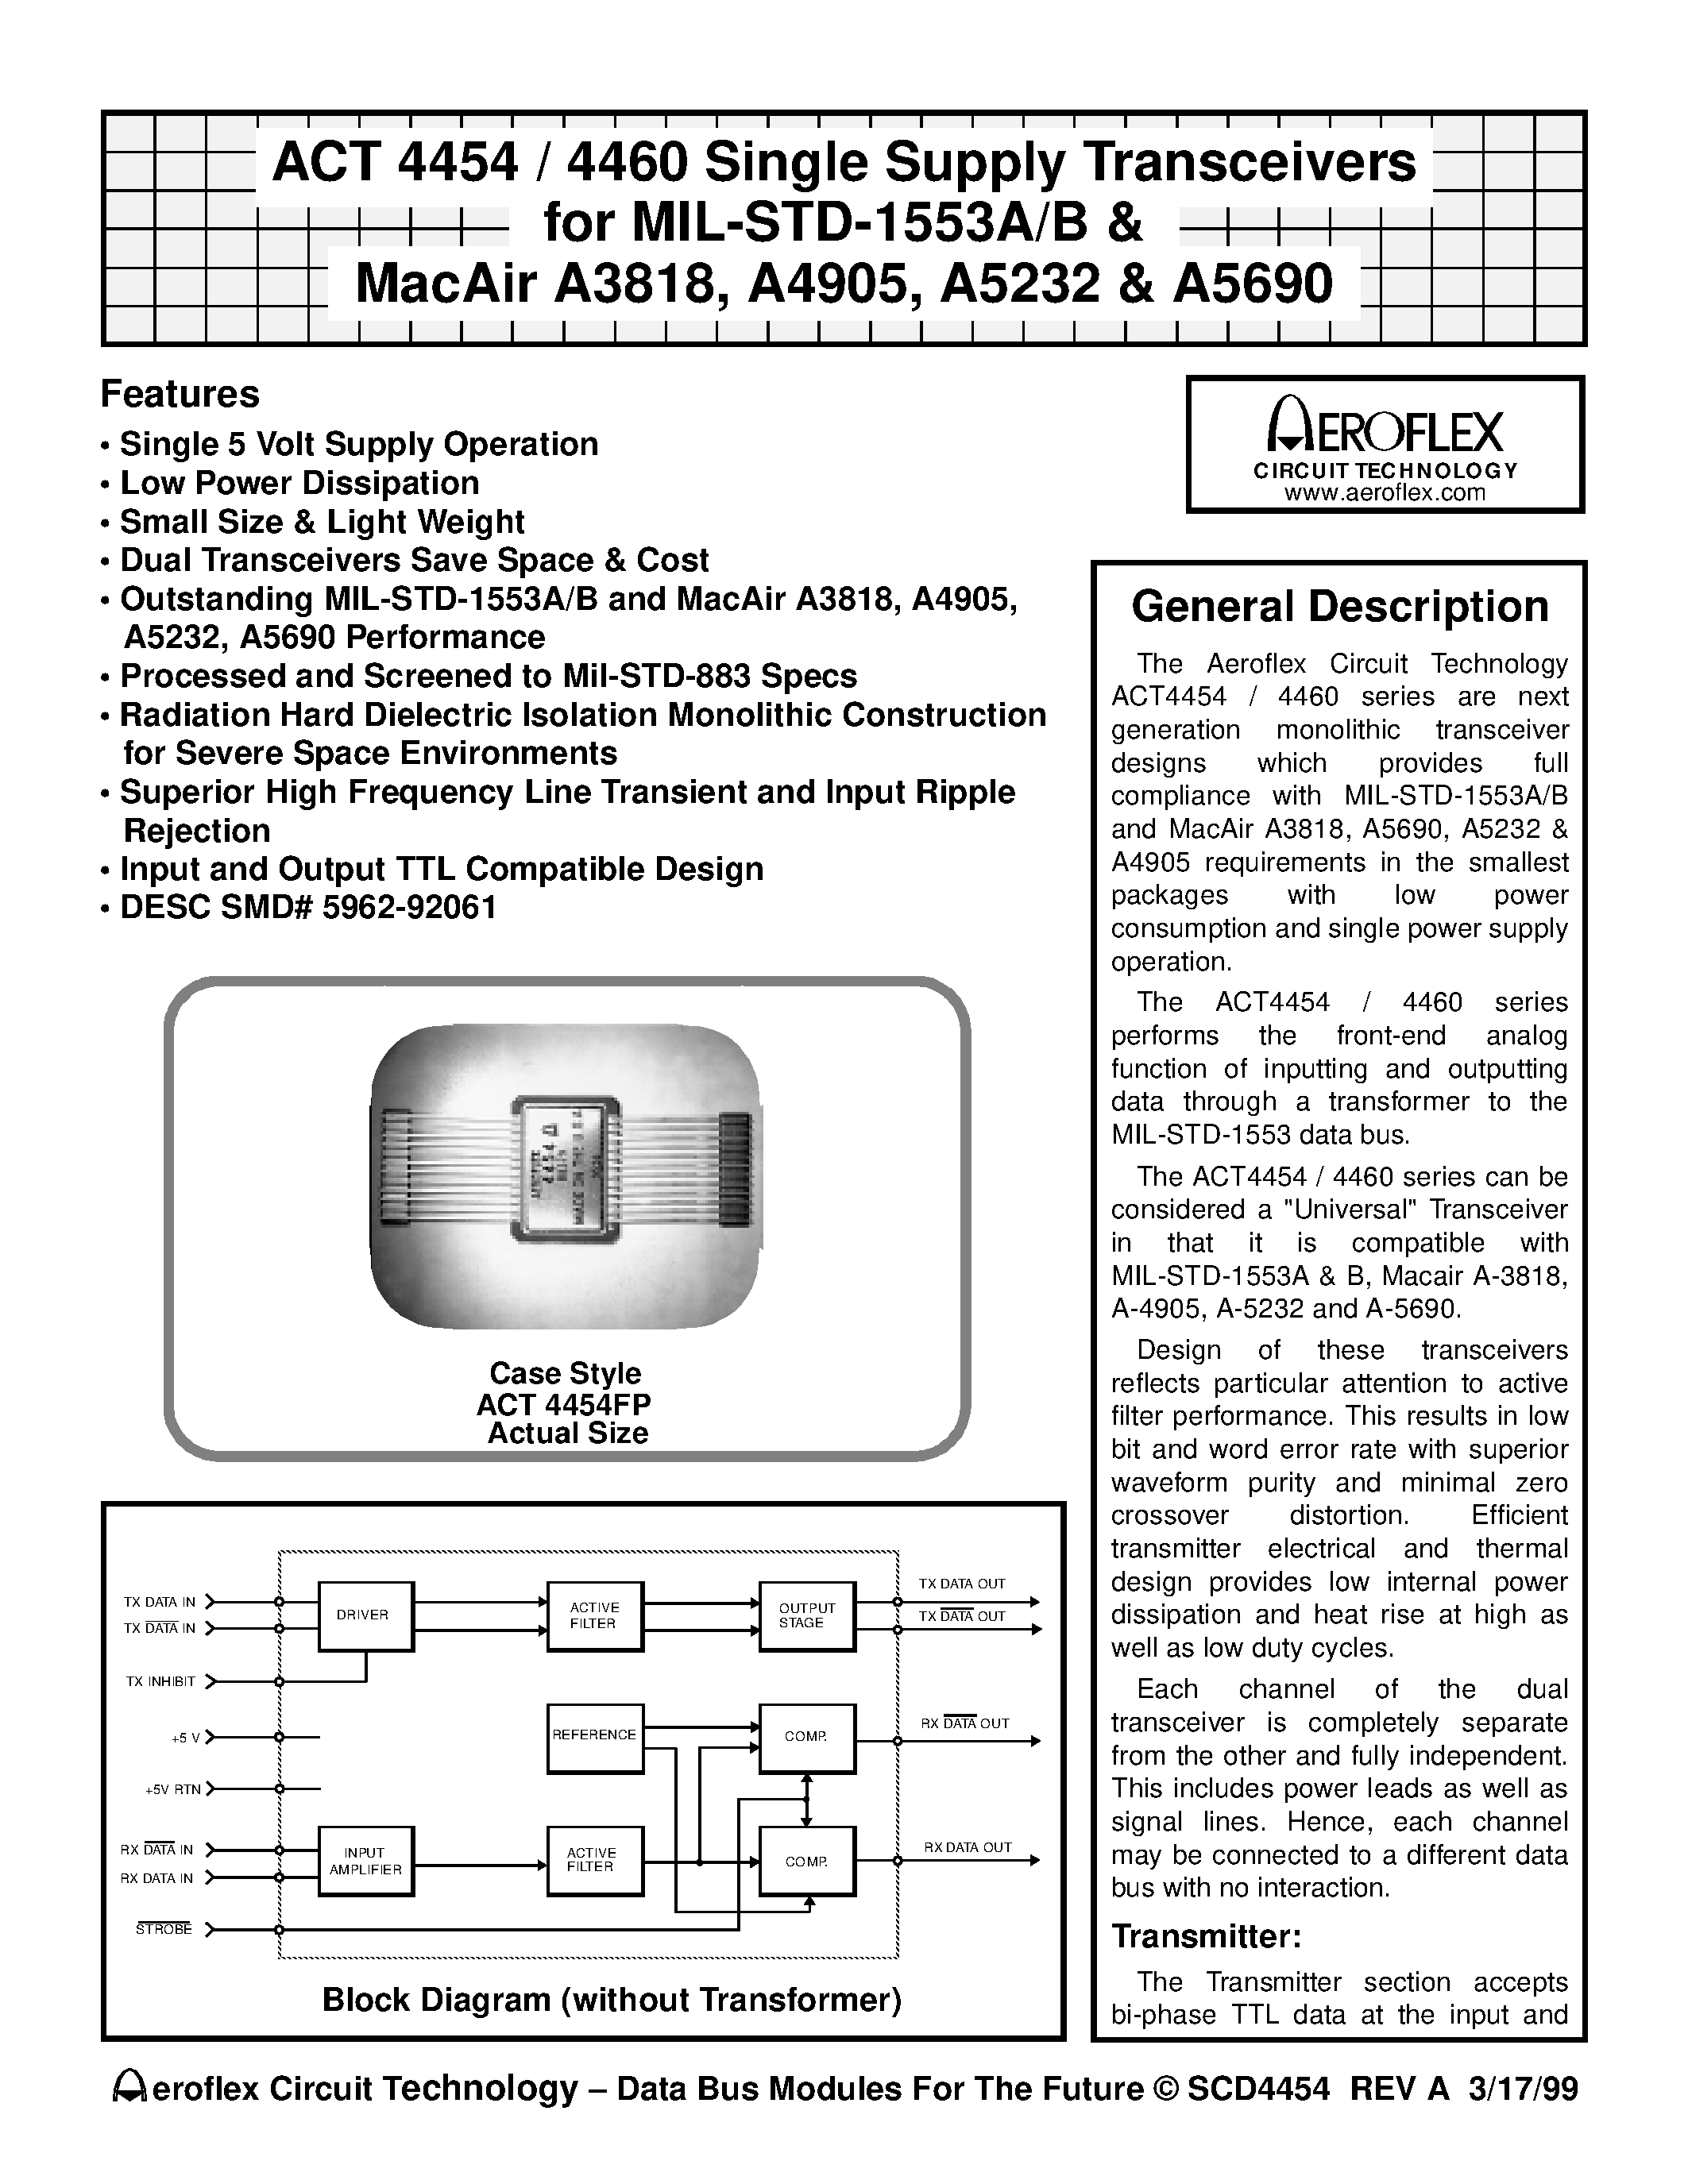 Datasheet ACT4454 - ACT 4454 / 4460 Single Supply Transceivers for MIL-STD-1553A/B & MacAir A3818/ A4905/ A5232 & A5690 page 1